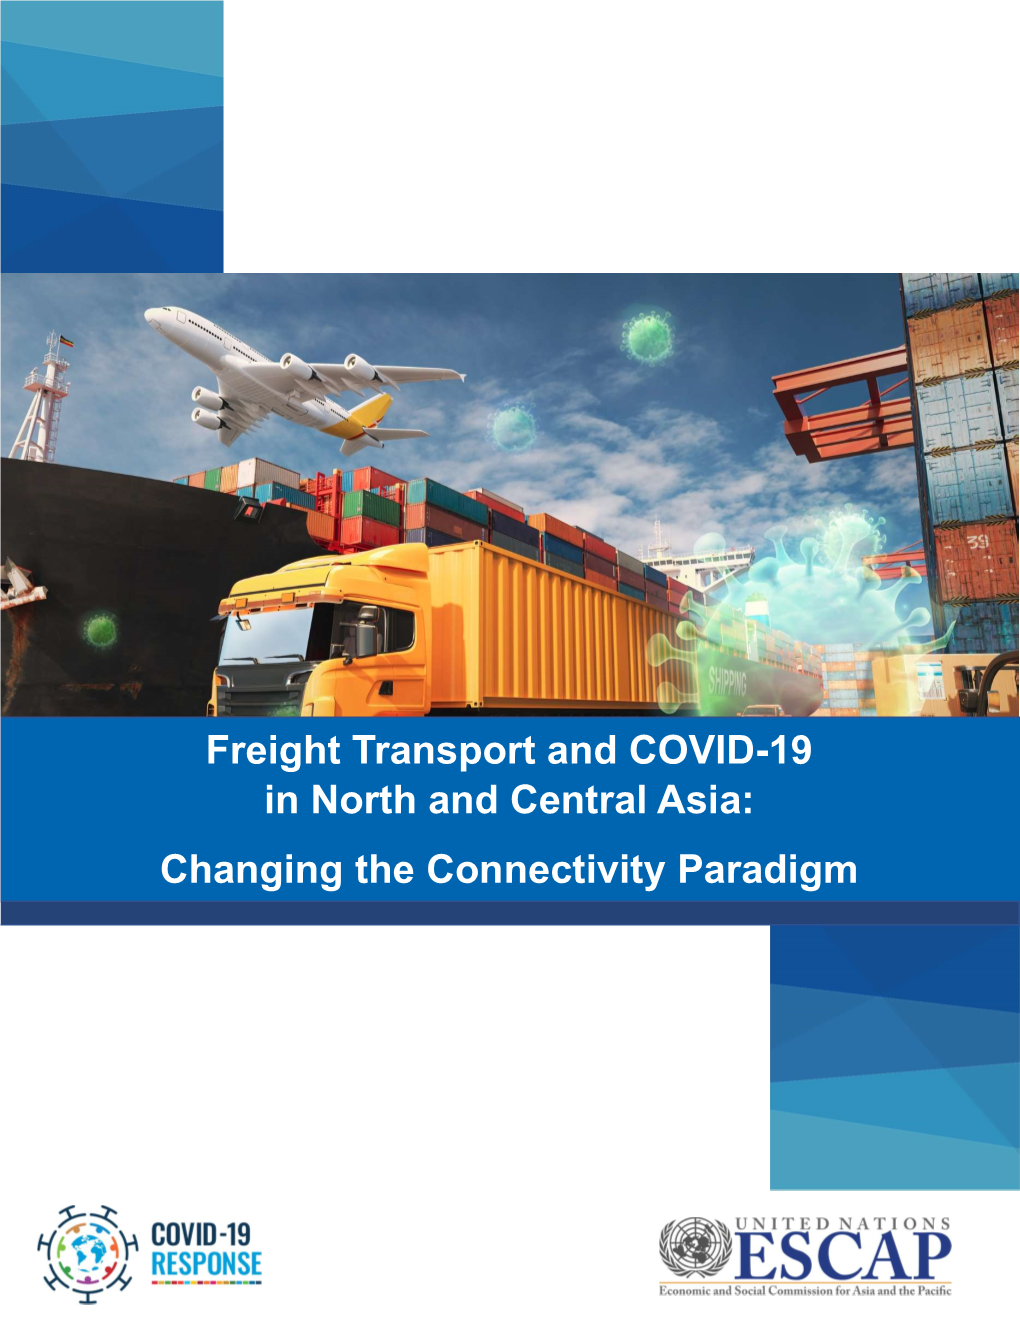 Freight Transport and COVID-19 in North and Central Asia: Changing the Connectivity Paradigm